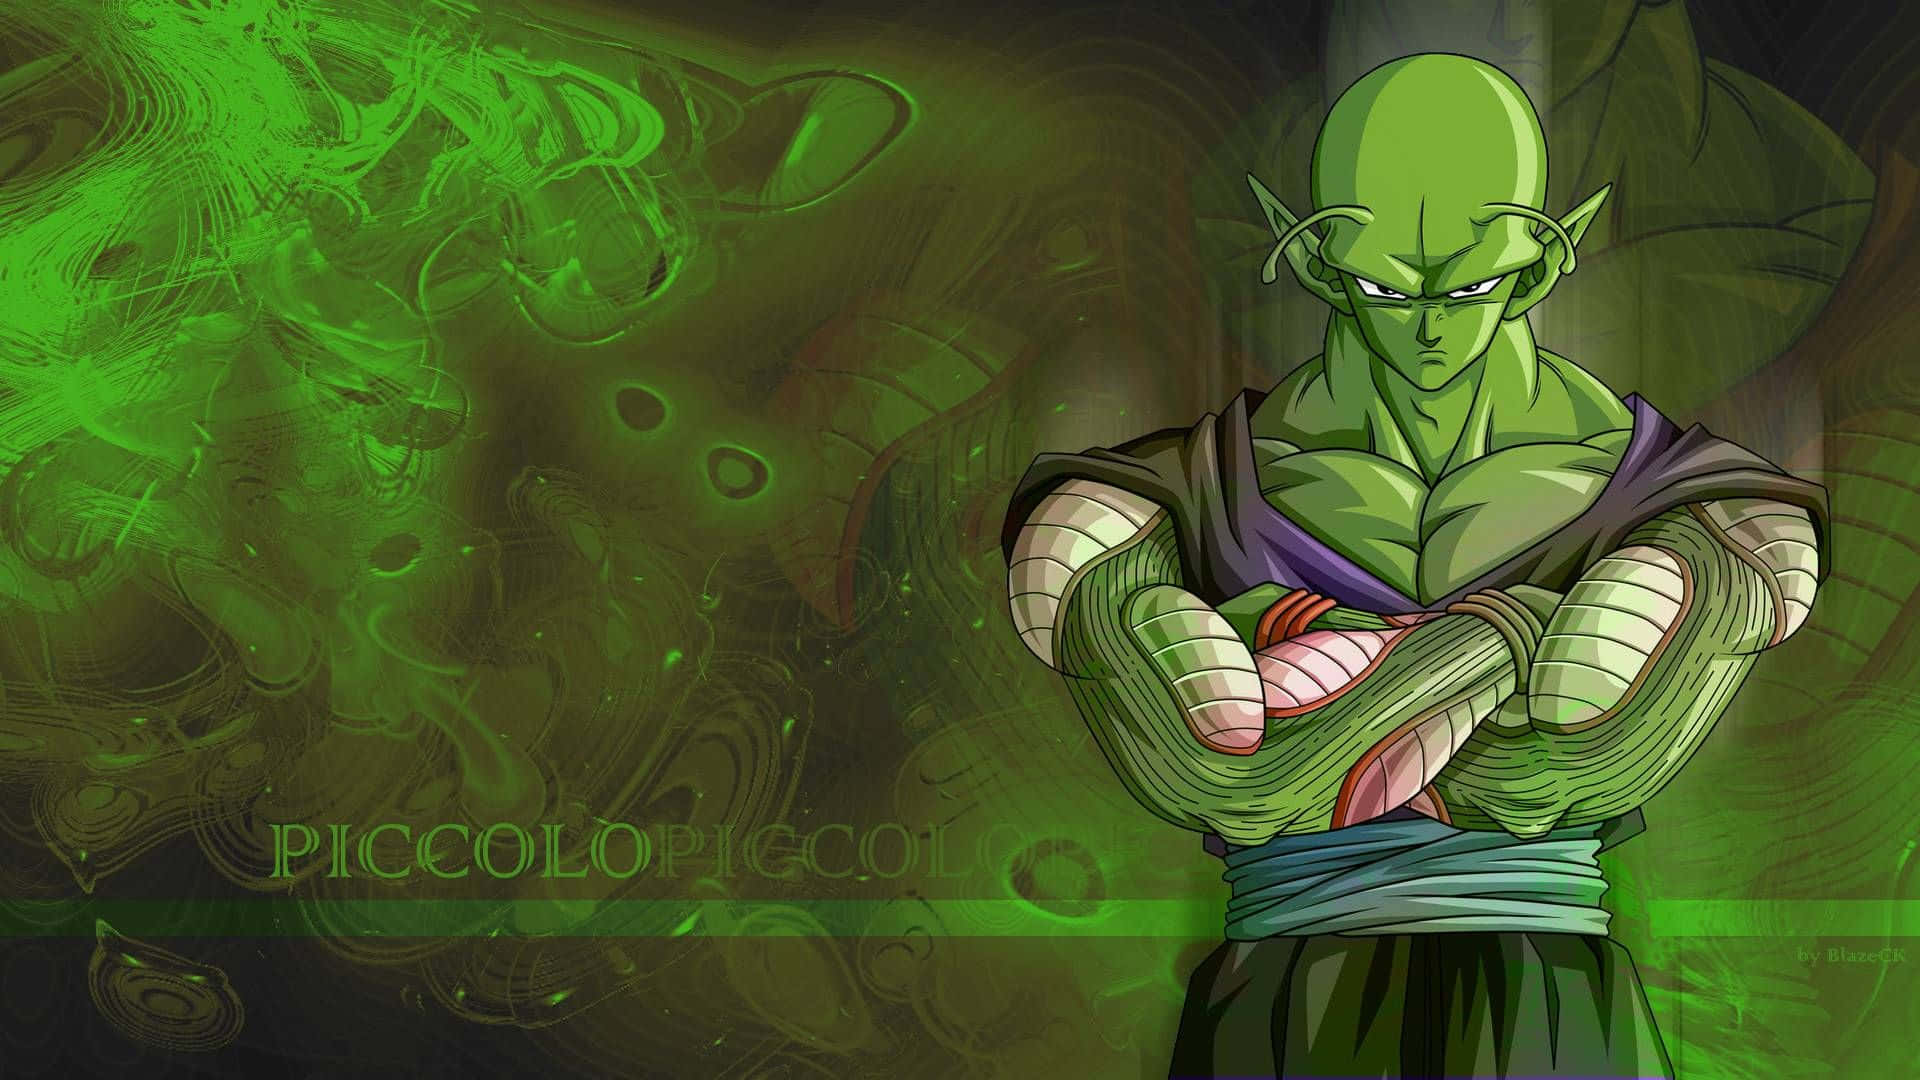 Enter the world of Namek and explore its majestic beauty! Wallpaper